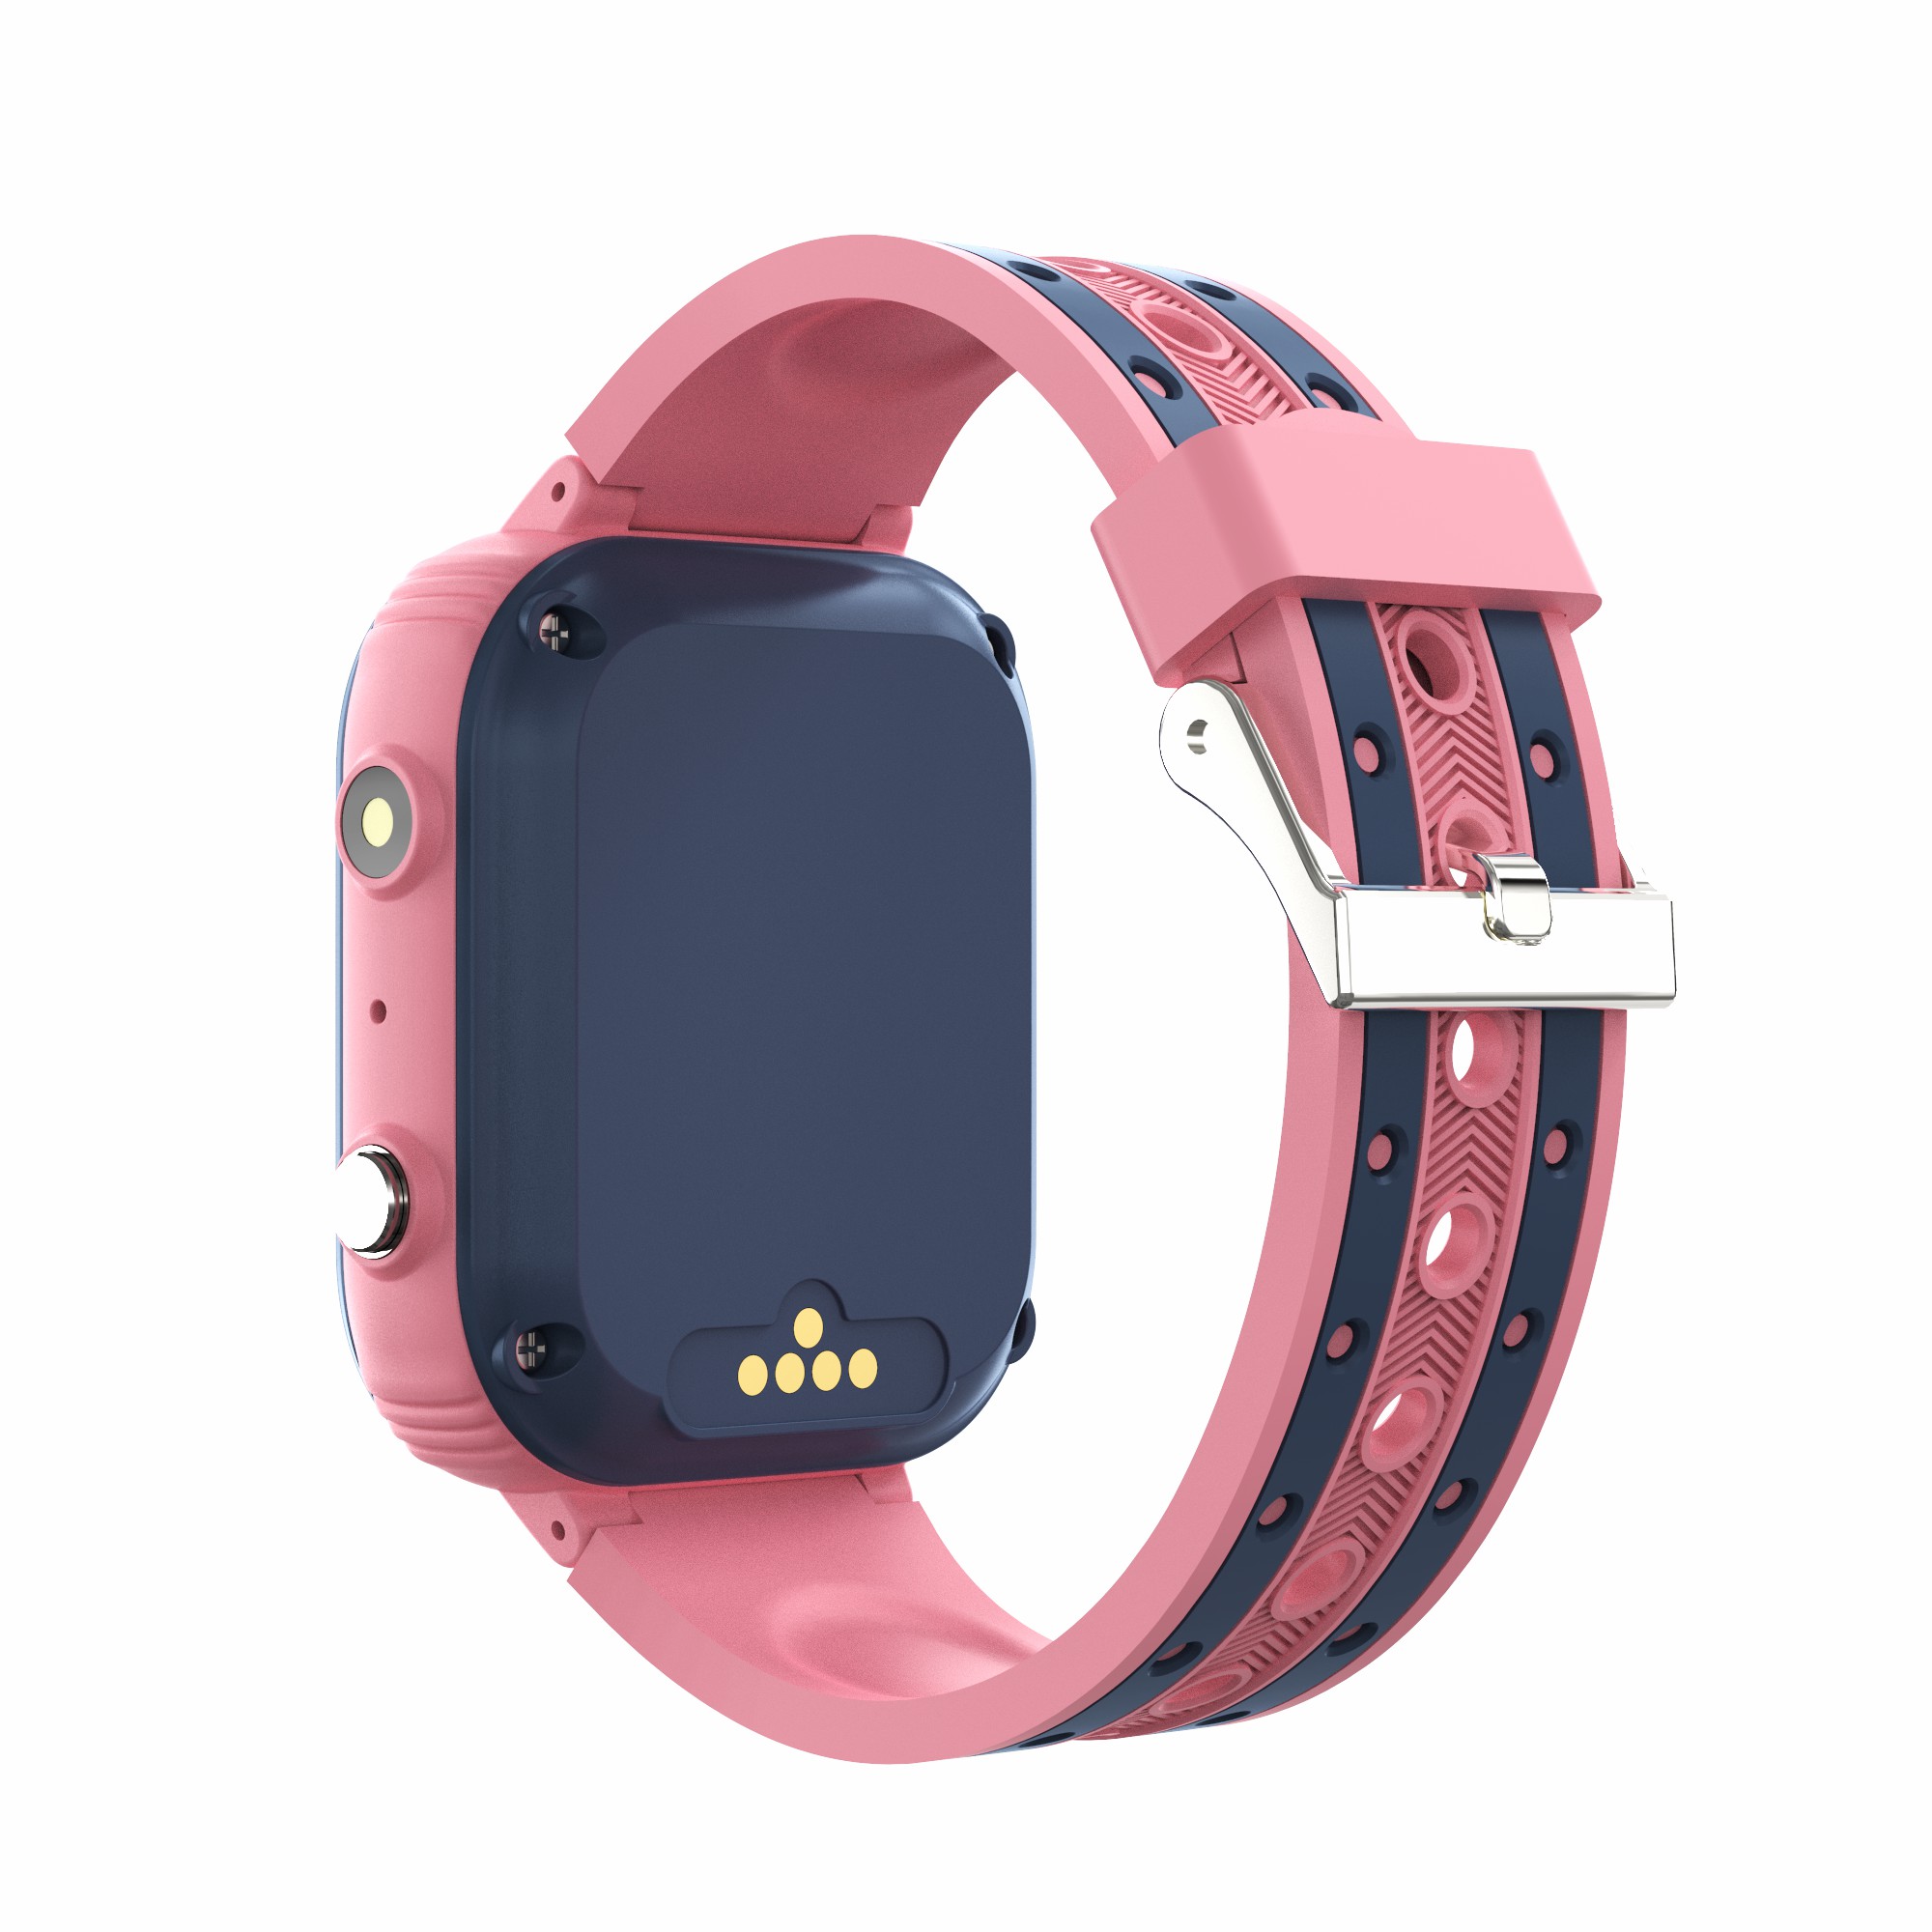 4G Waterproof IP67 Anti-lost Android wearable security smart GPS Tracker watch with torch light Video call D53